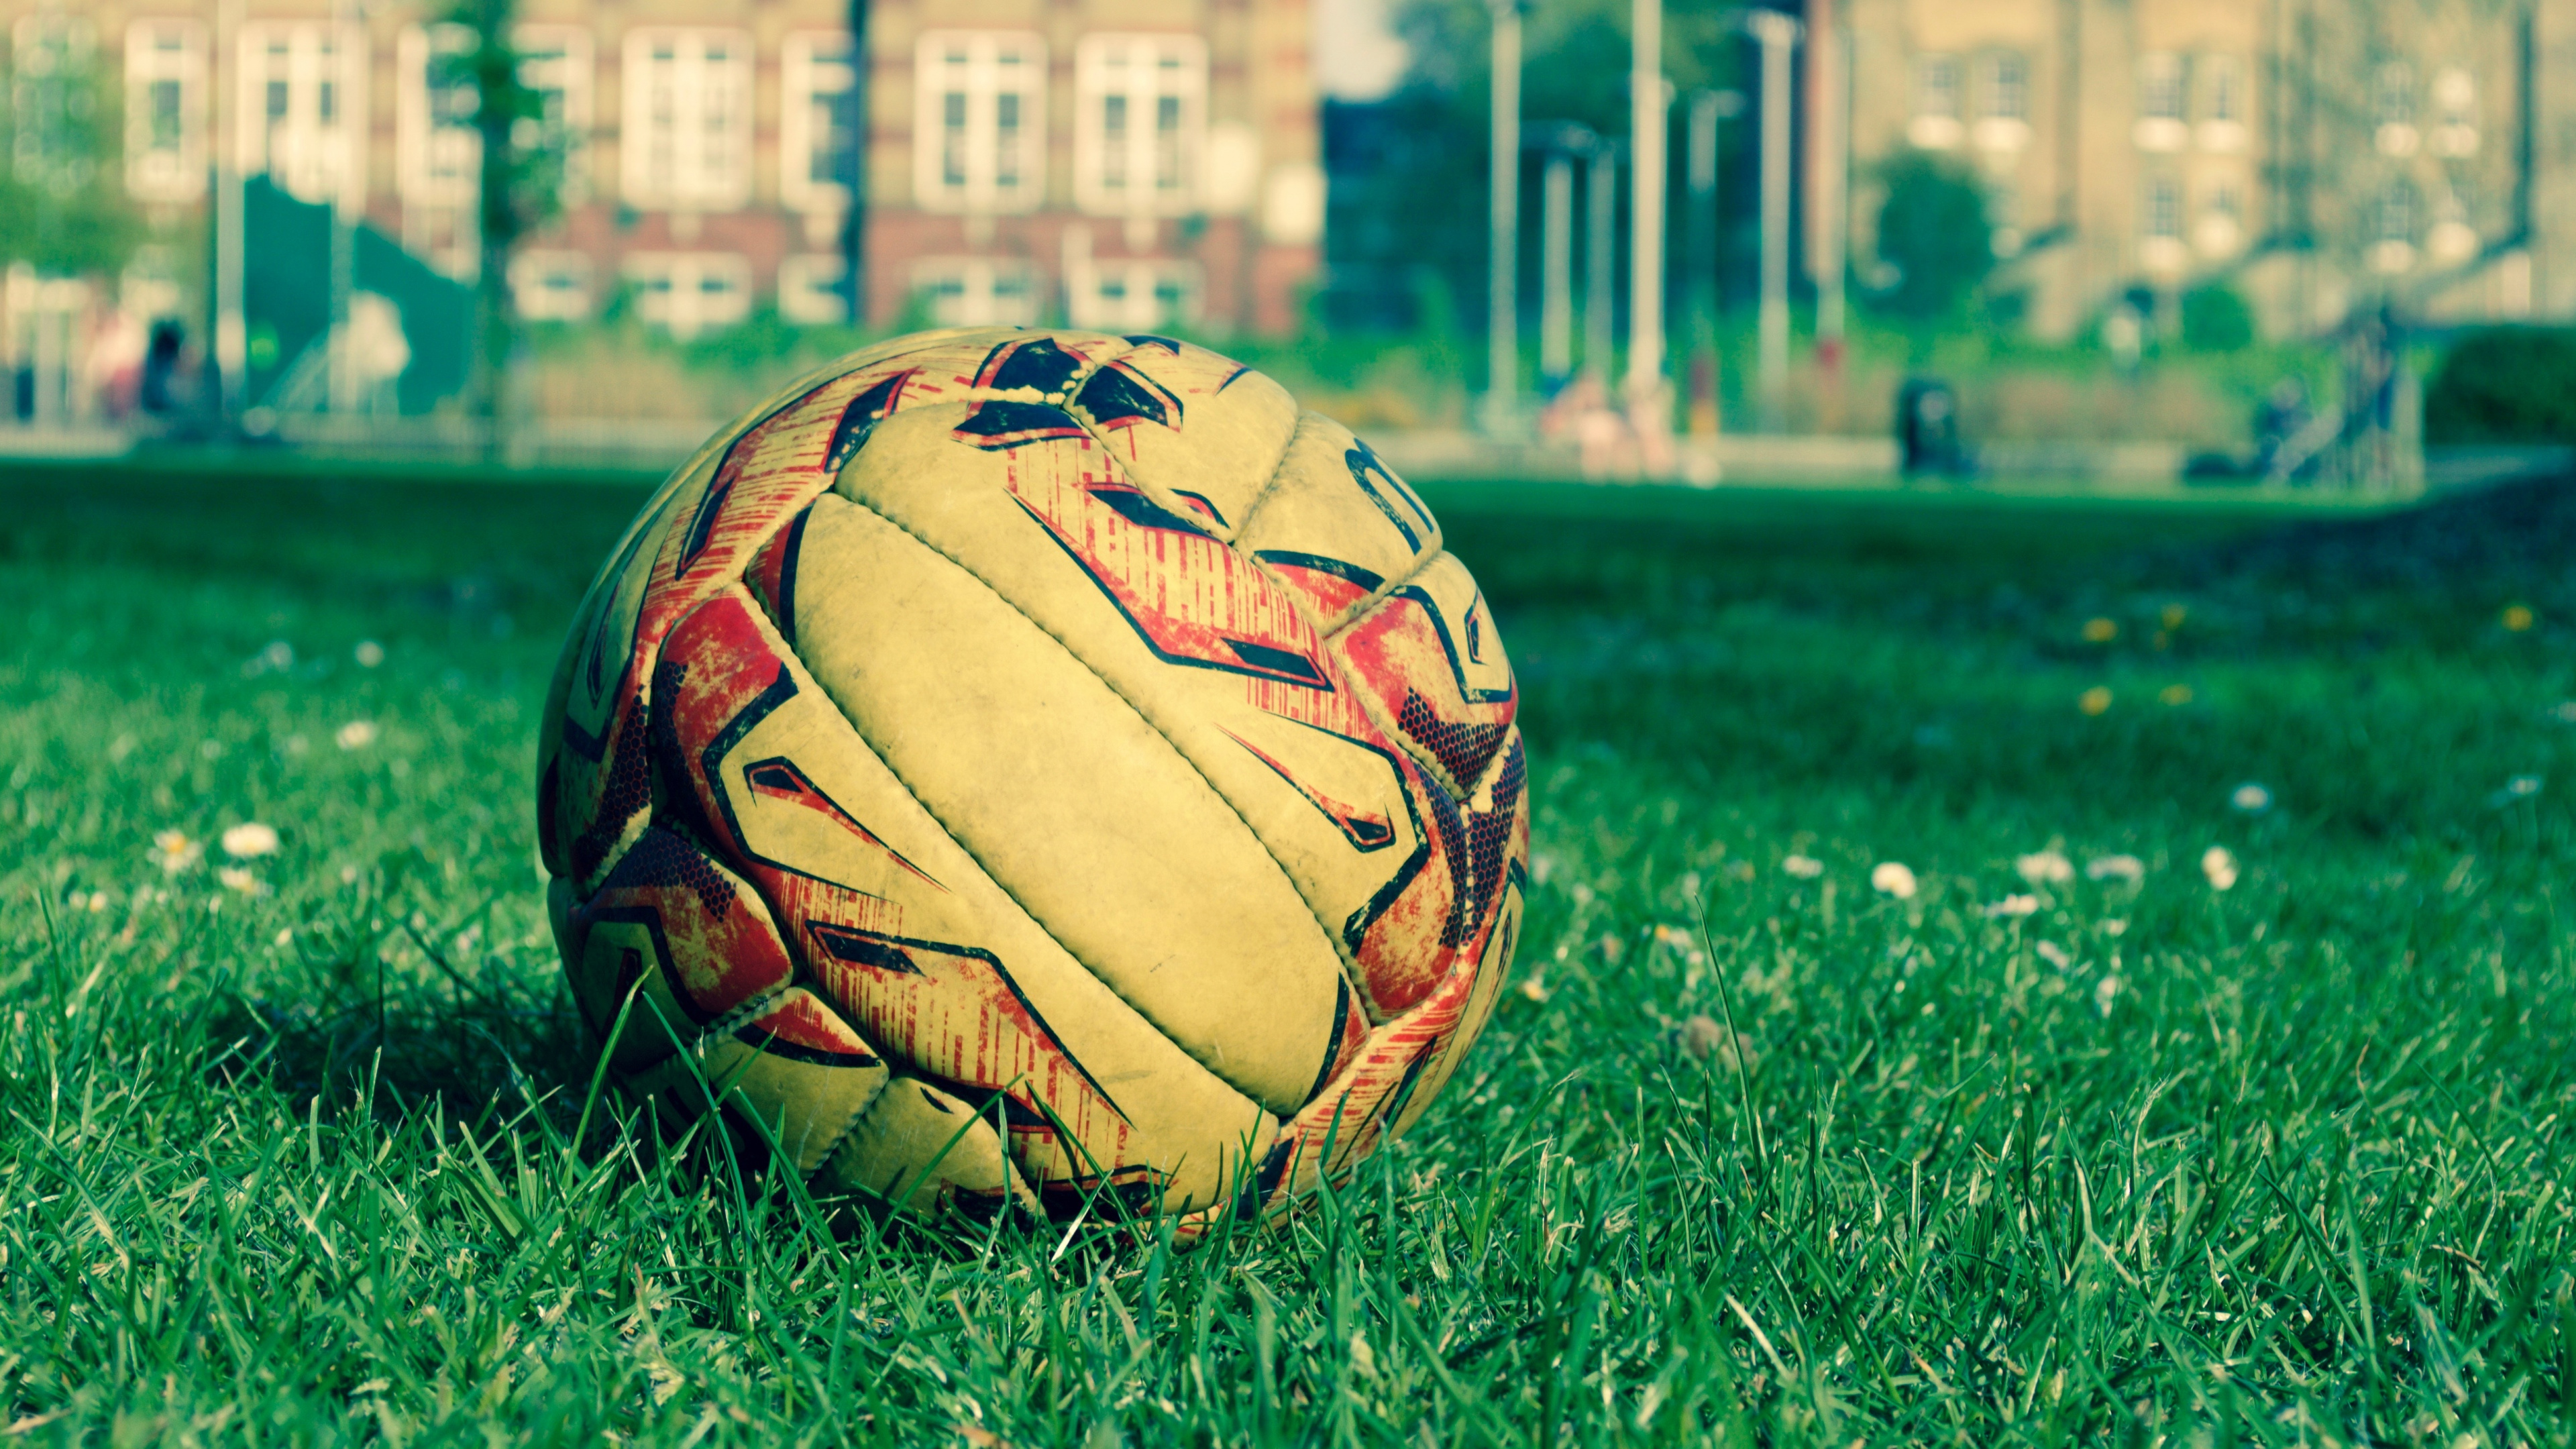 Brown and Black Soccer Ball on Green Grass Field During Daytime. Wallpaper in 3840x2160 Resolution